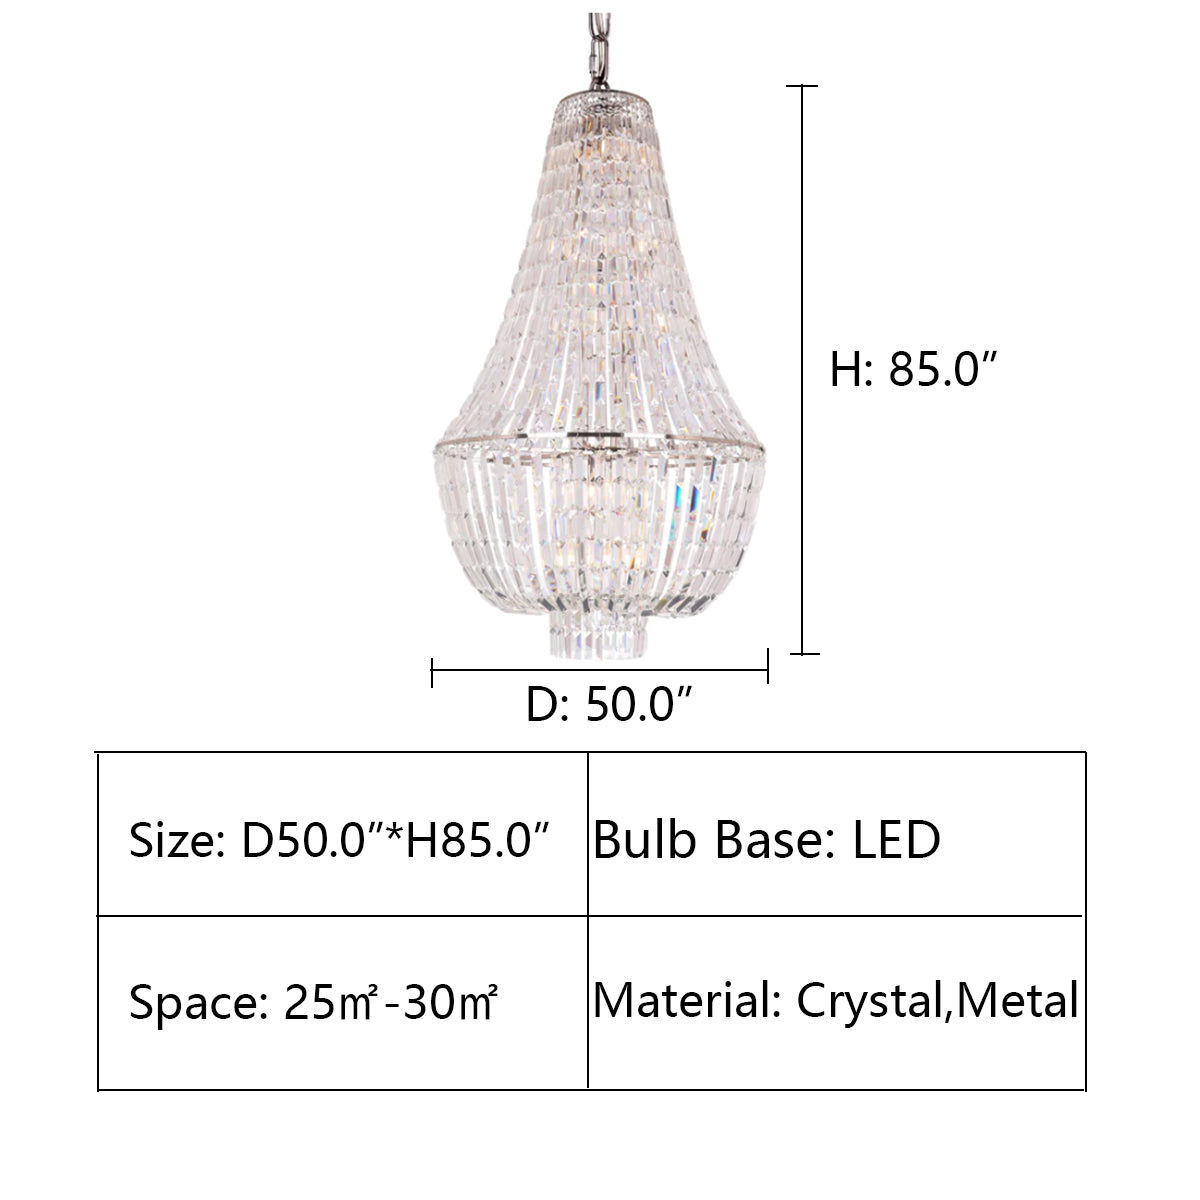 D50.0"*H85.0" Andreas Empire Crystal Prysm Chandelier,chandelier,chandeliers,empire,round,crystal,pendant,metal,crystal chain,ceiling,oversized,large,extra large,huge,stairs,foyer,living room,entrys,hallway